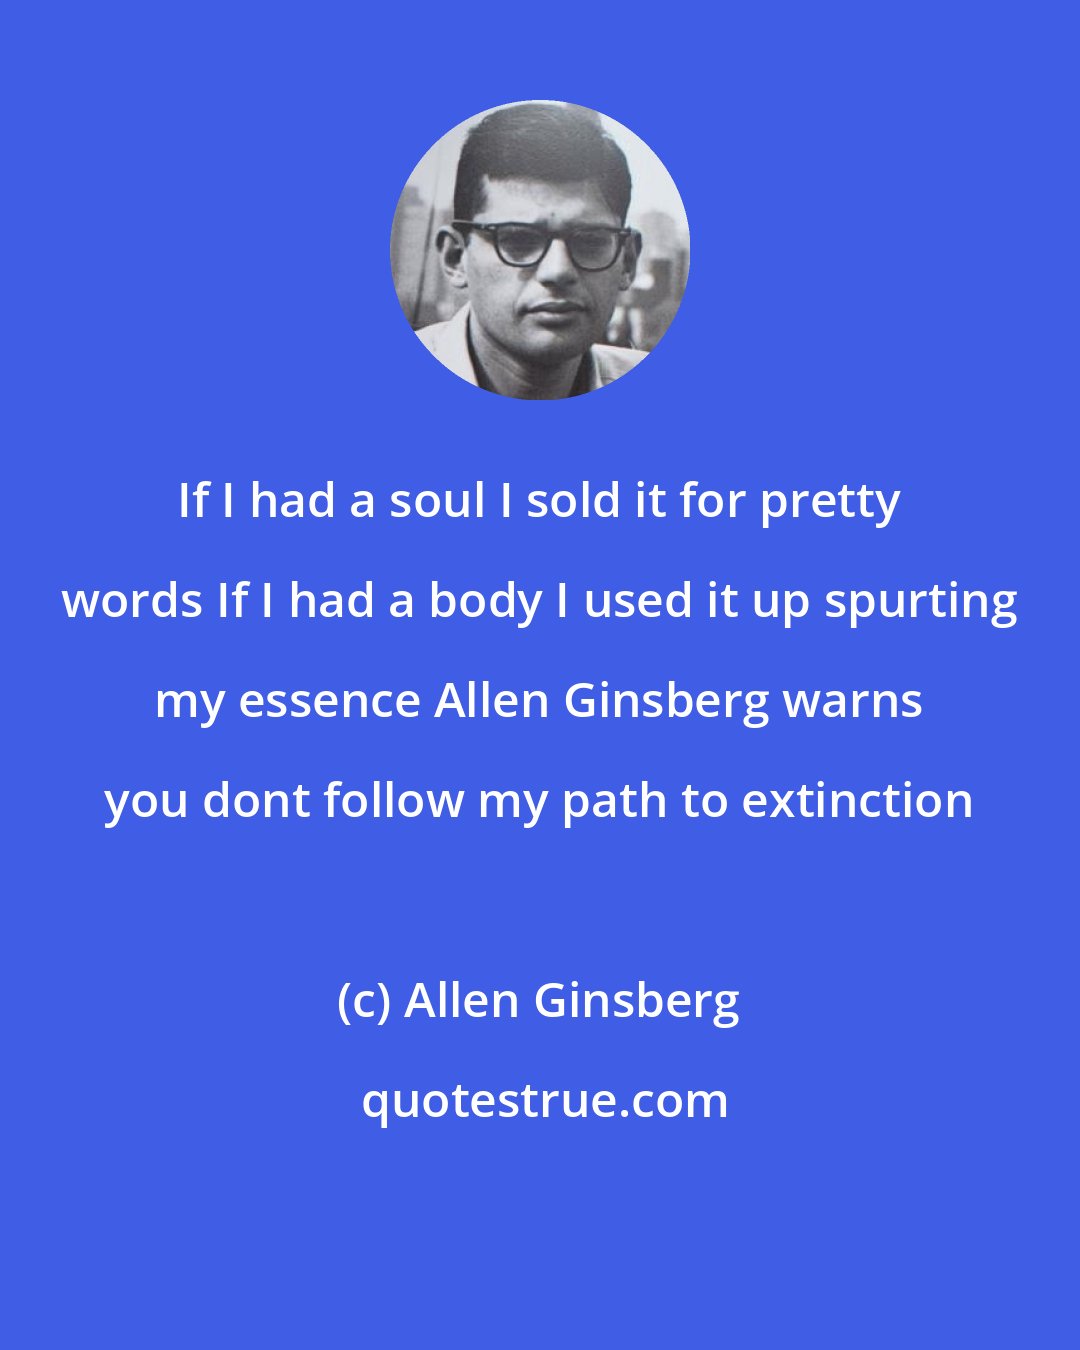 Allen Ginsberg: If I had a soul I sold it for pretty words If I had a body I used it up spurting my essence Allen Ginsberg warns you dont follow my path to extinction